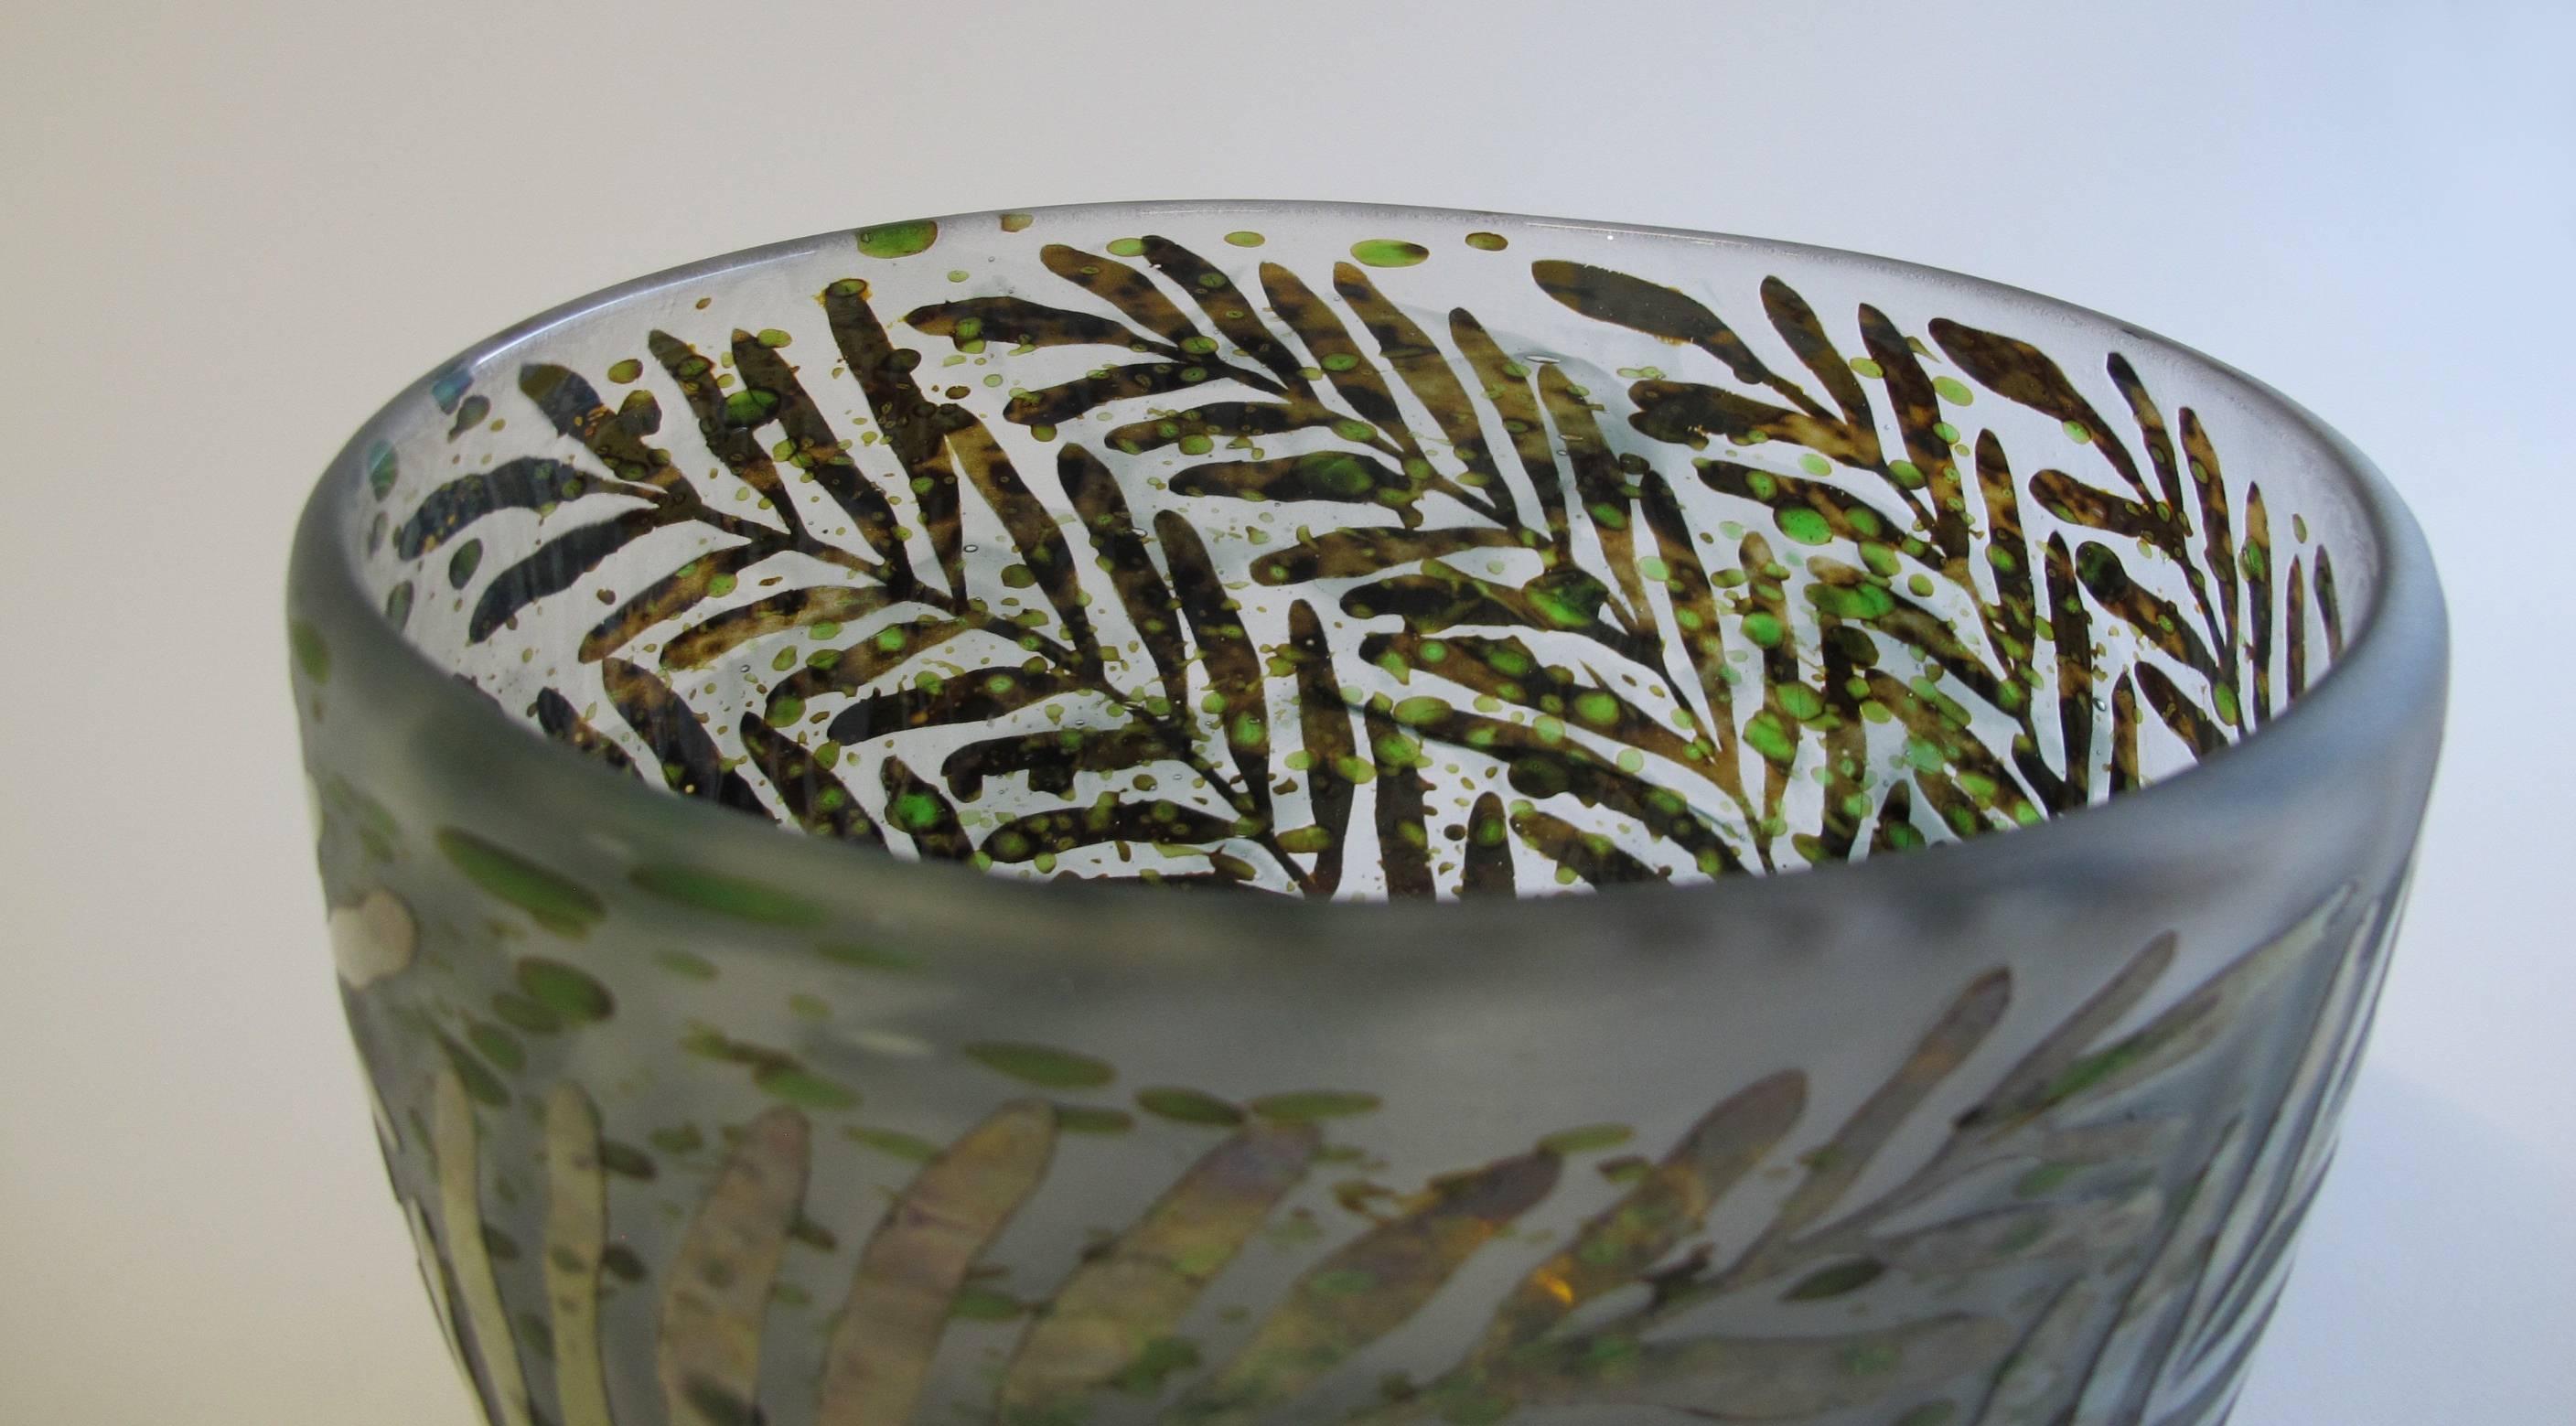 Gorgeous glass vase designed by Heikki Orvola and manufactured at Nuutajärvi Notsjo. The vase has an etched pattern with leaves all-over the surface. The outside of the vase shows a matted surface and the leaves have an almost oily shine. The inside